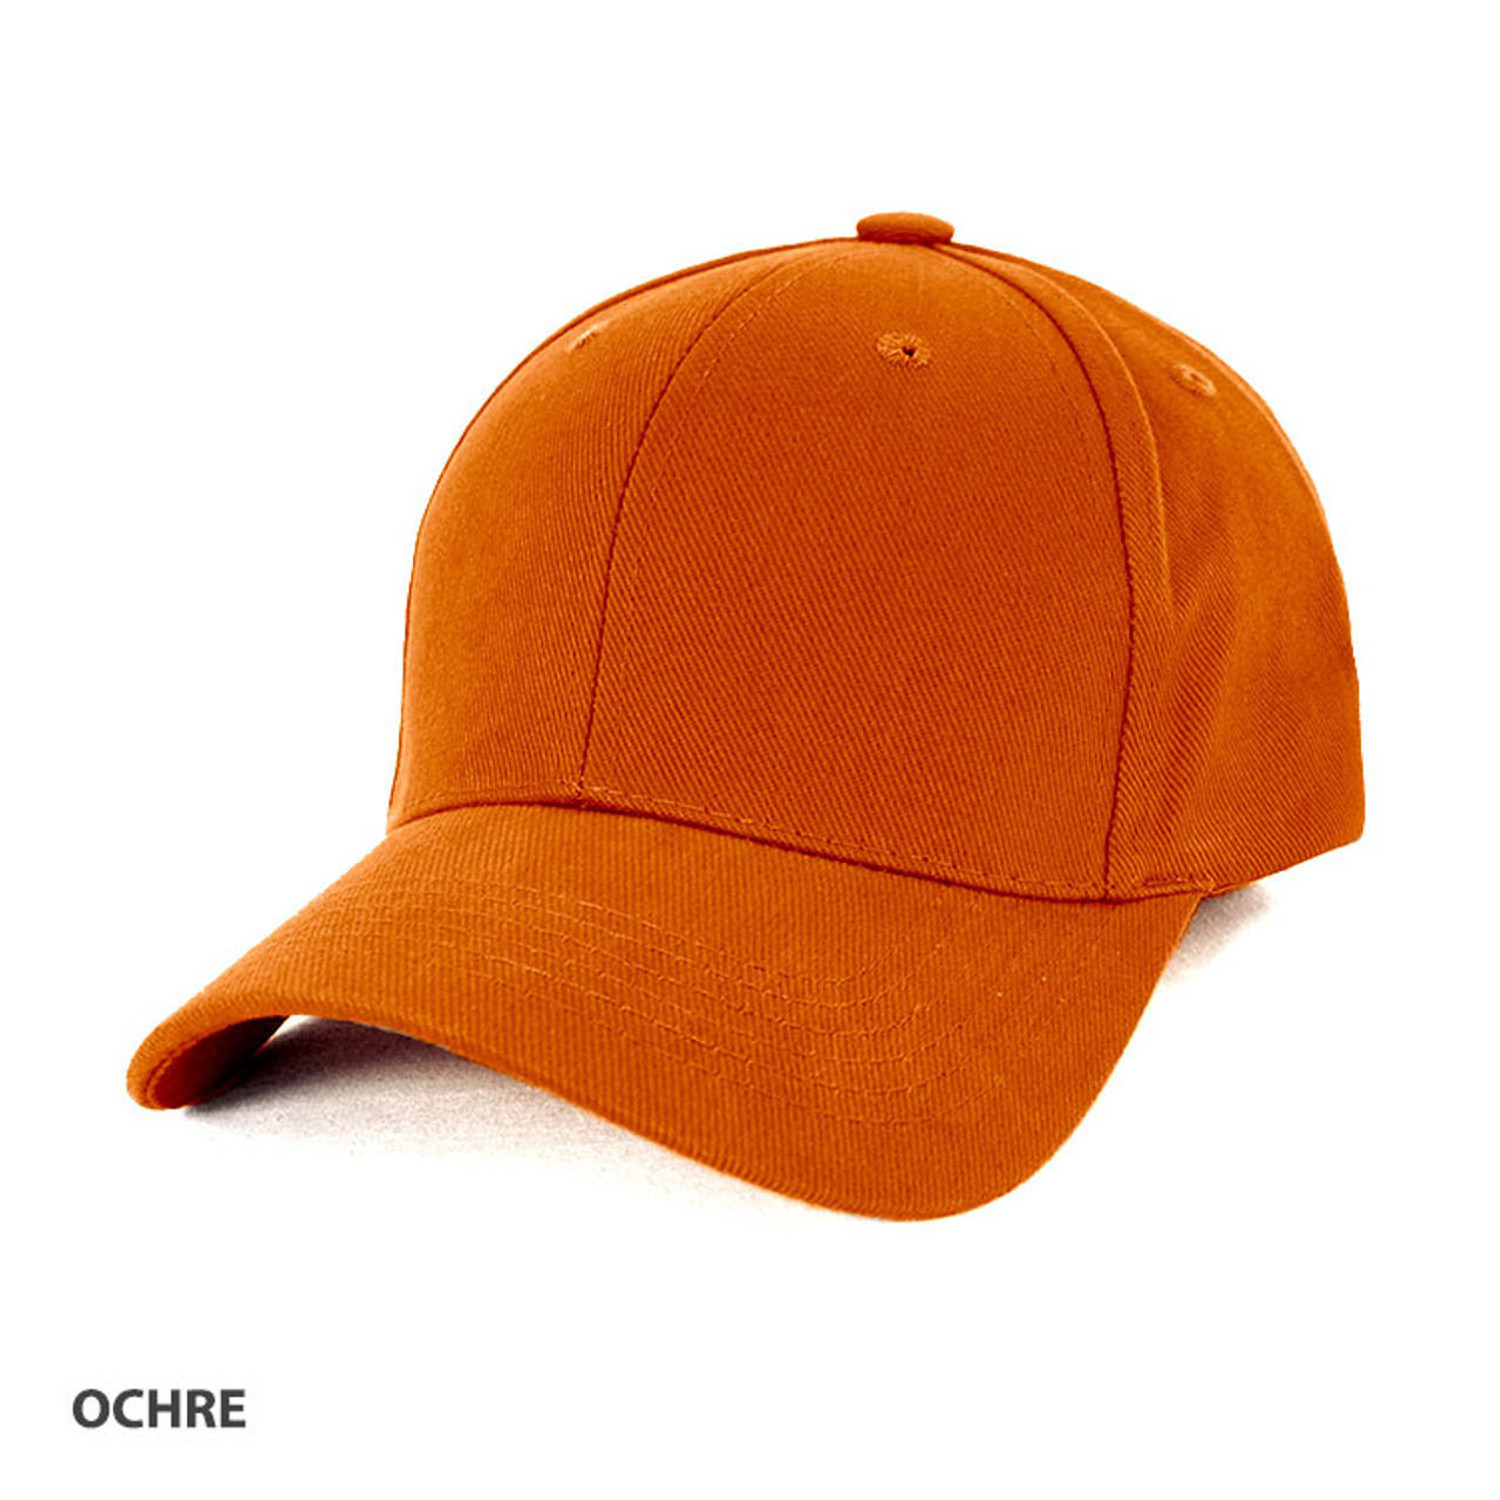  FREE EMBROIDERY - Heavy Brushed Cotton Cap in Ochre (Buy 20+) 